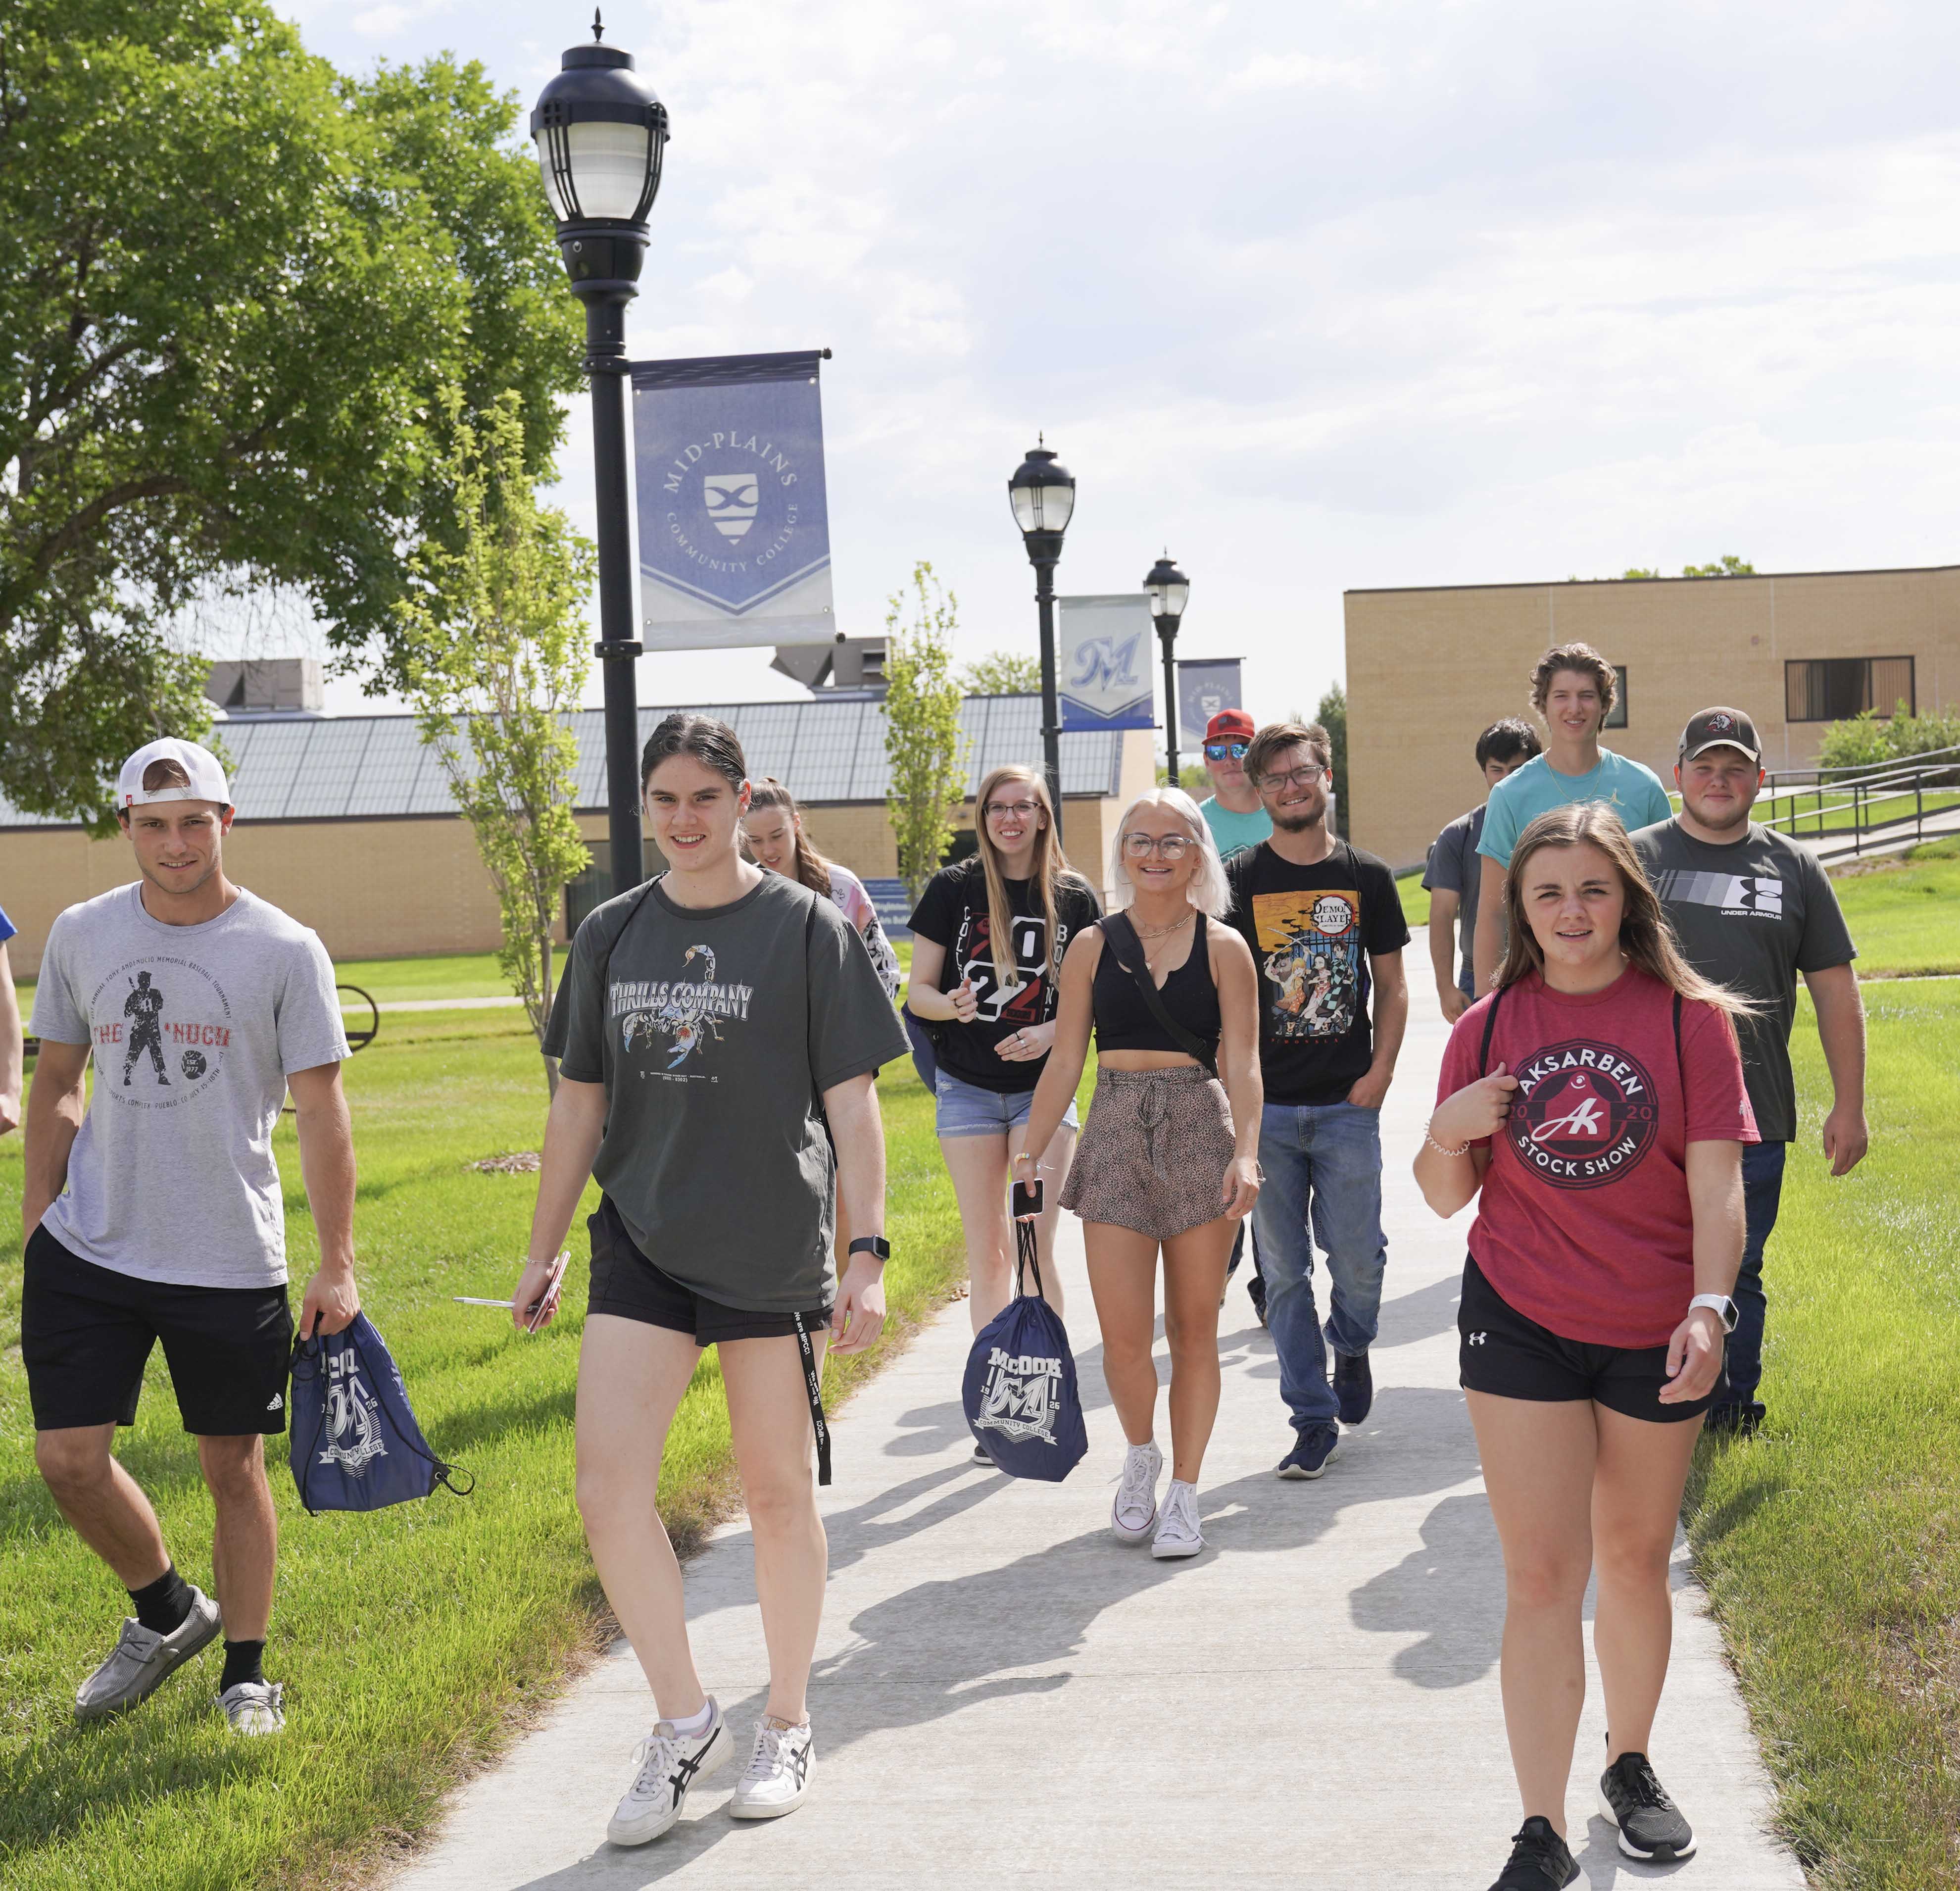 Campus buzzing with the arrival of students for fall semester